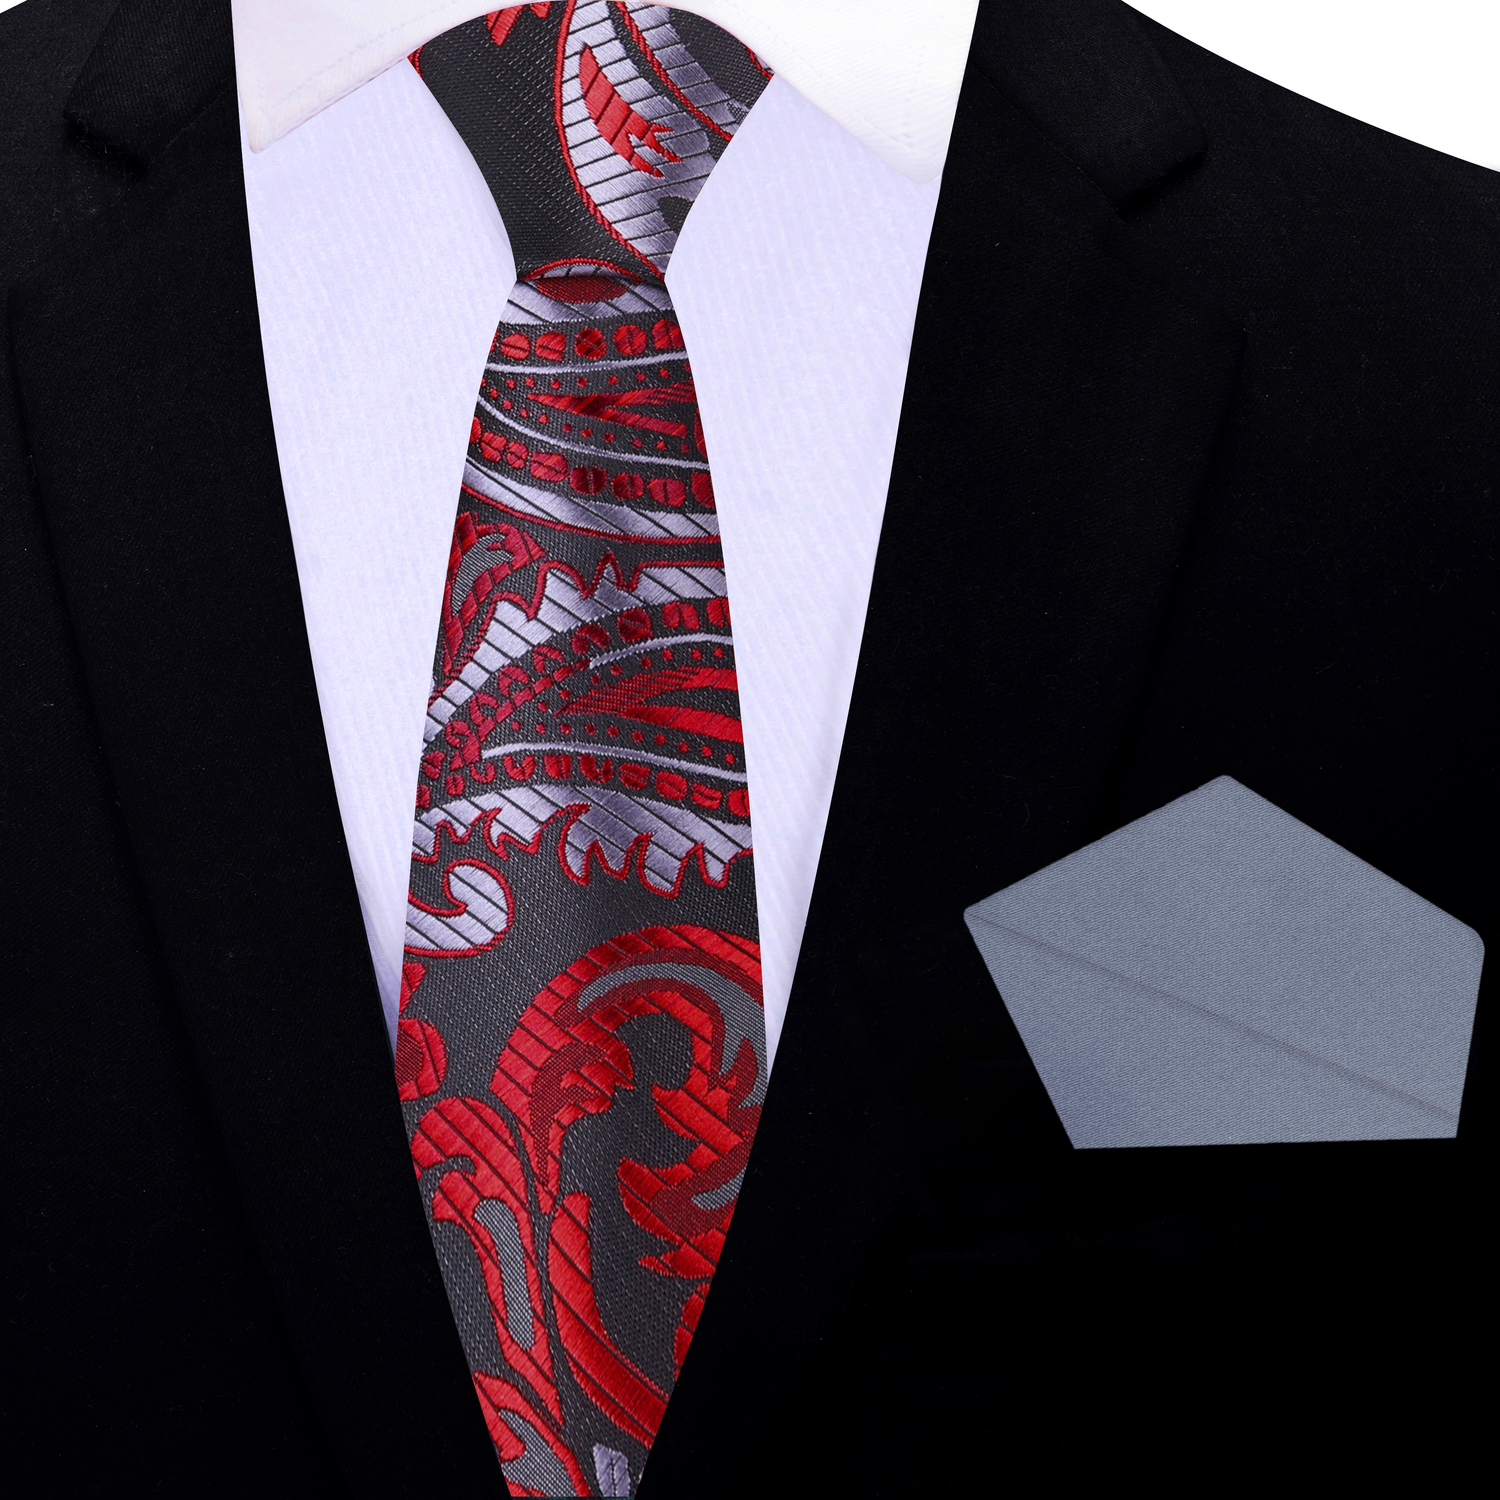 Thin Tie: Red, Black, Silver Paisley Necktie with Grey Pocket Square